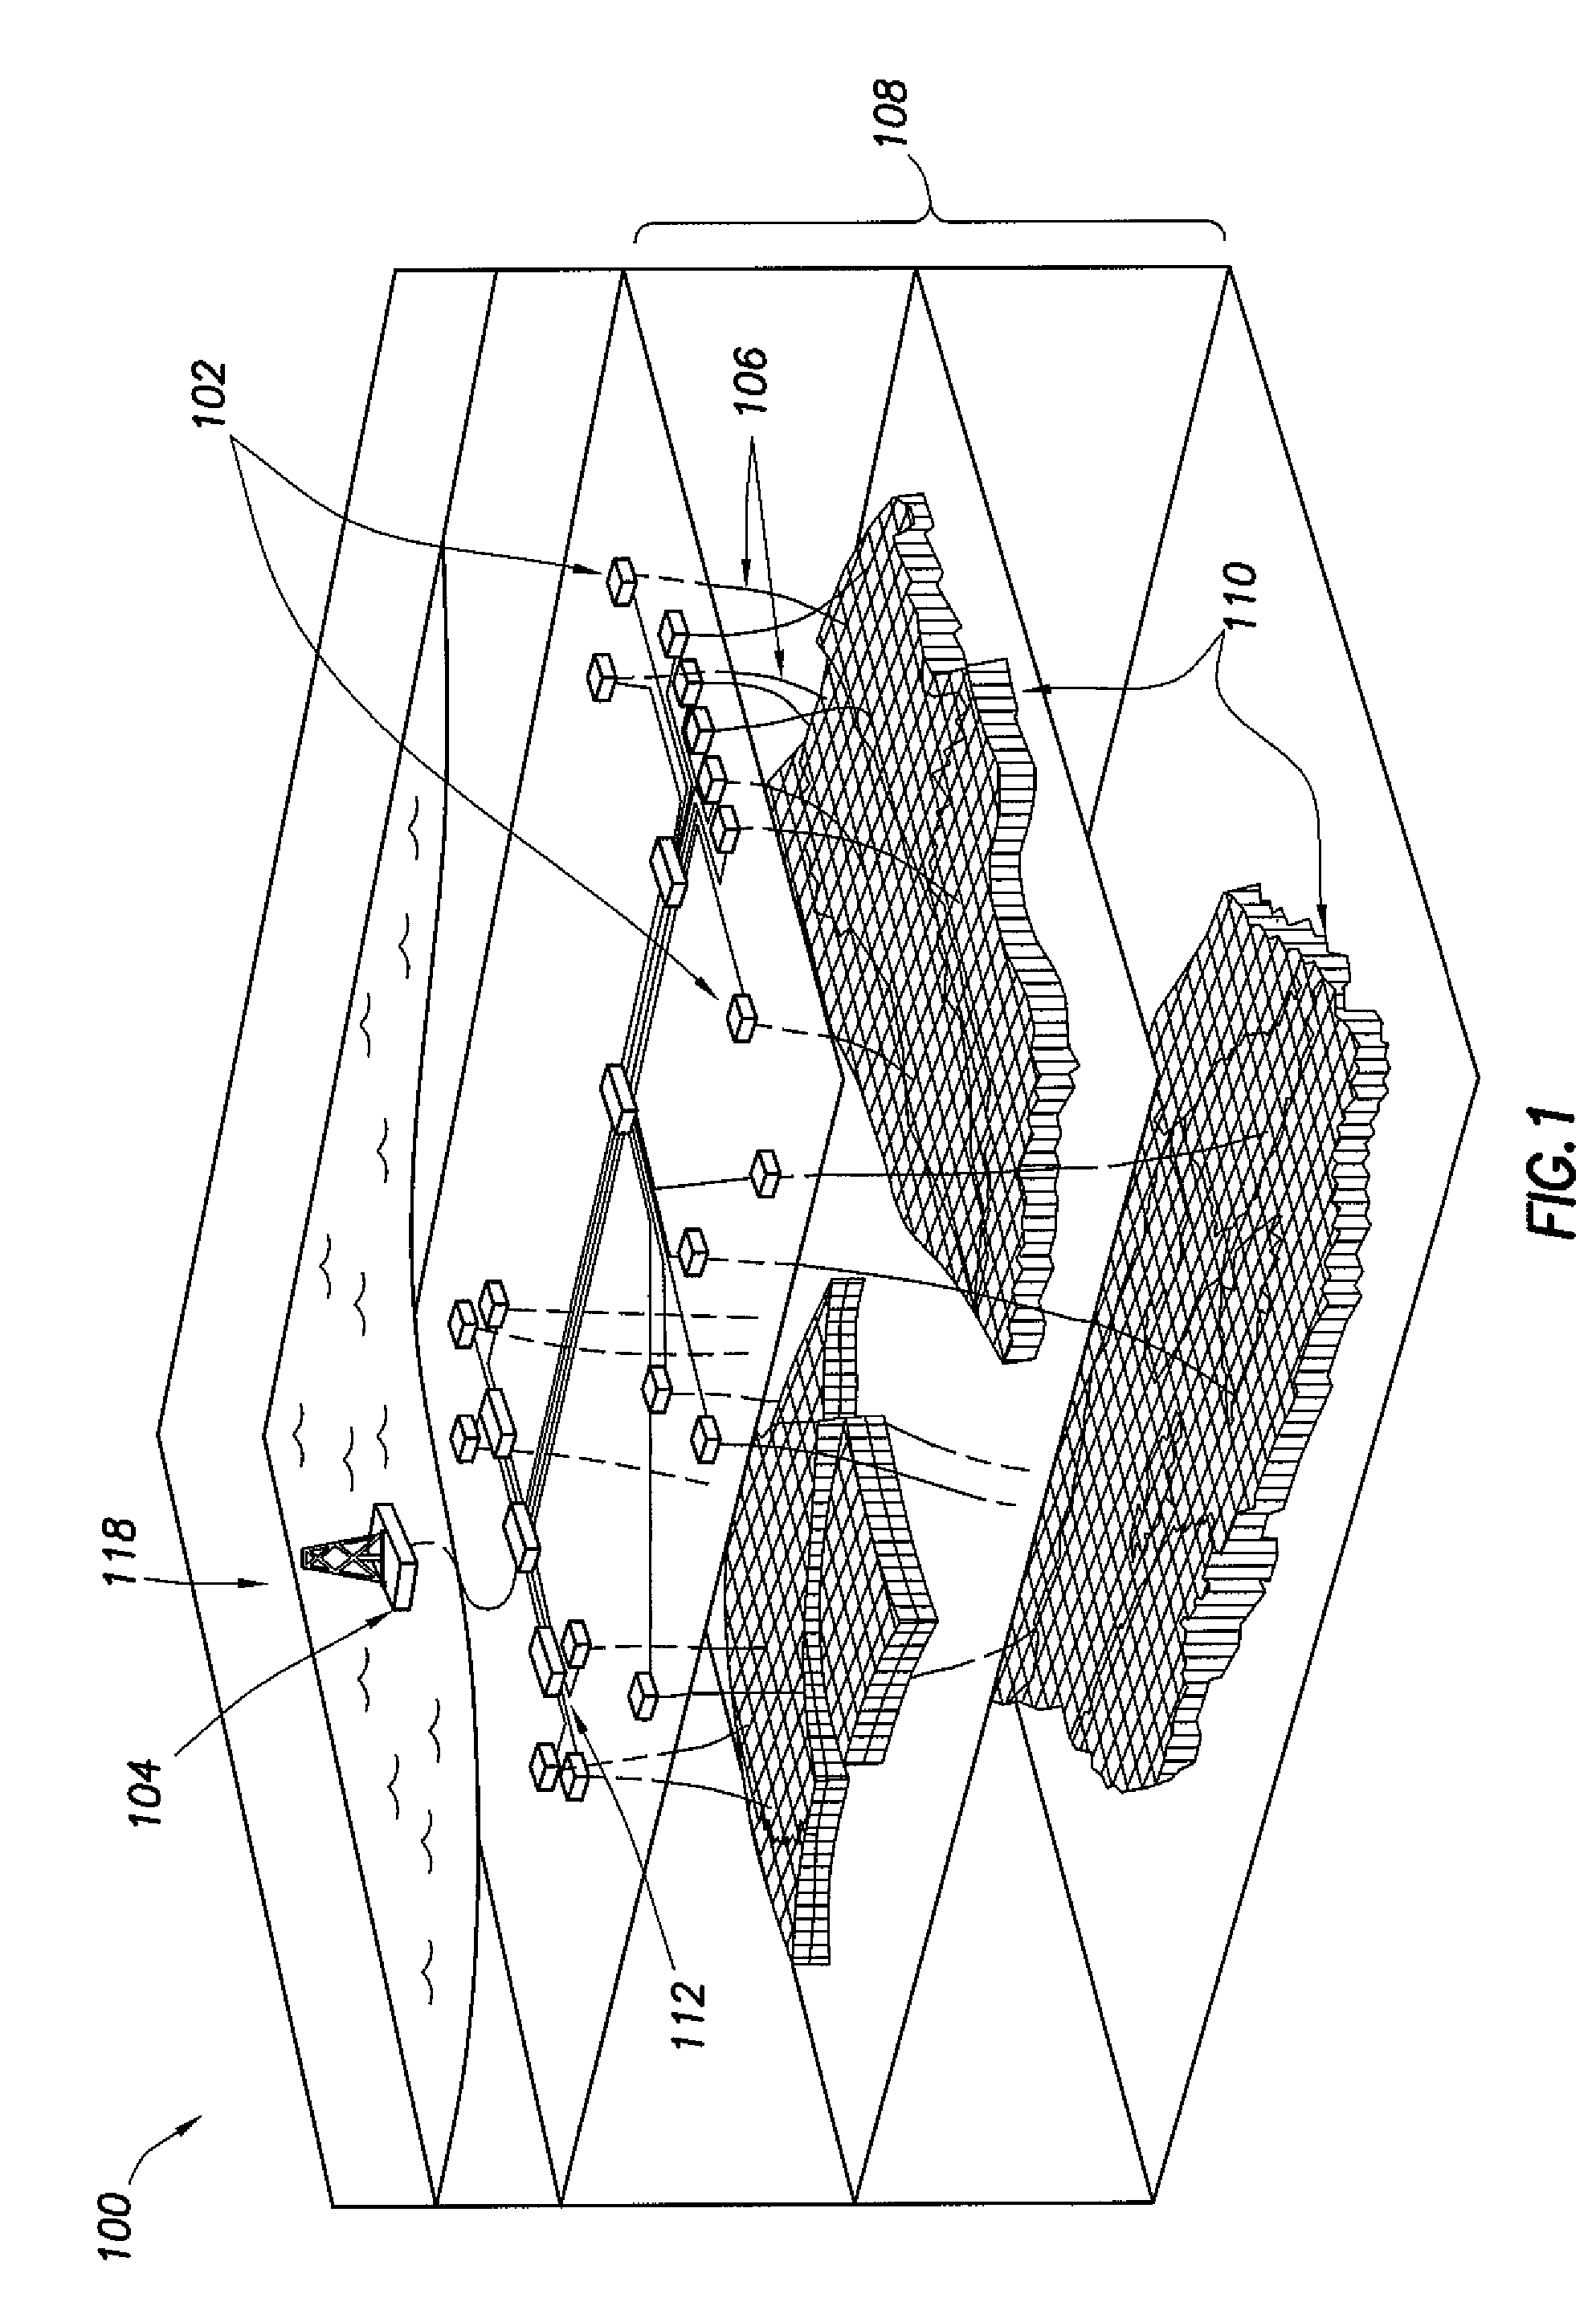 Oilfield operational system and method